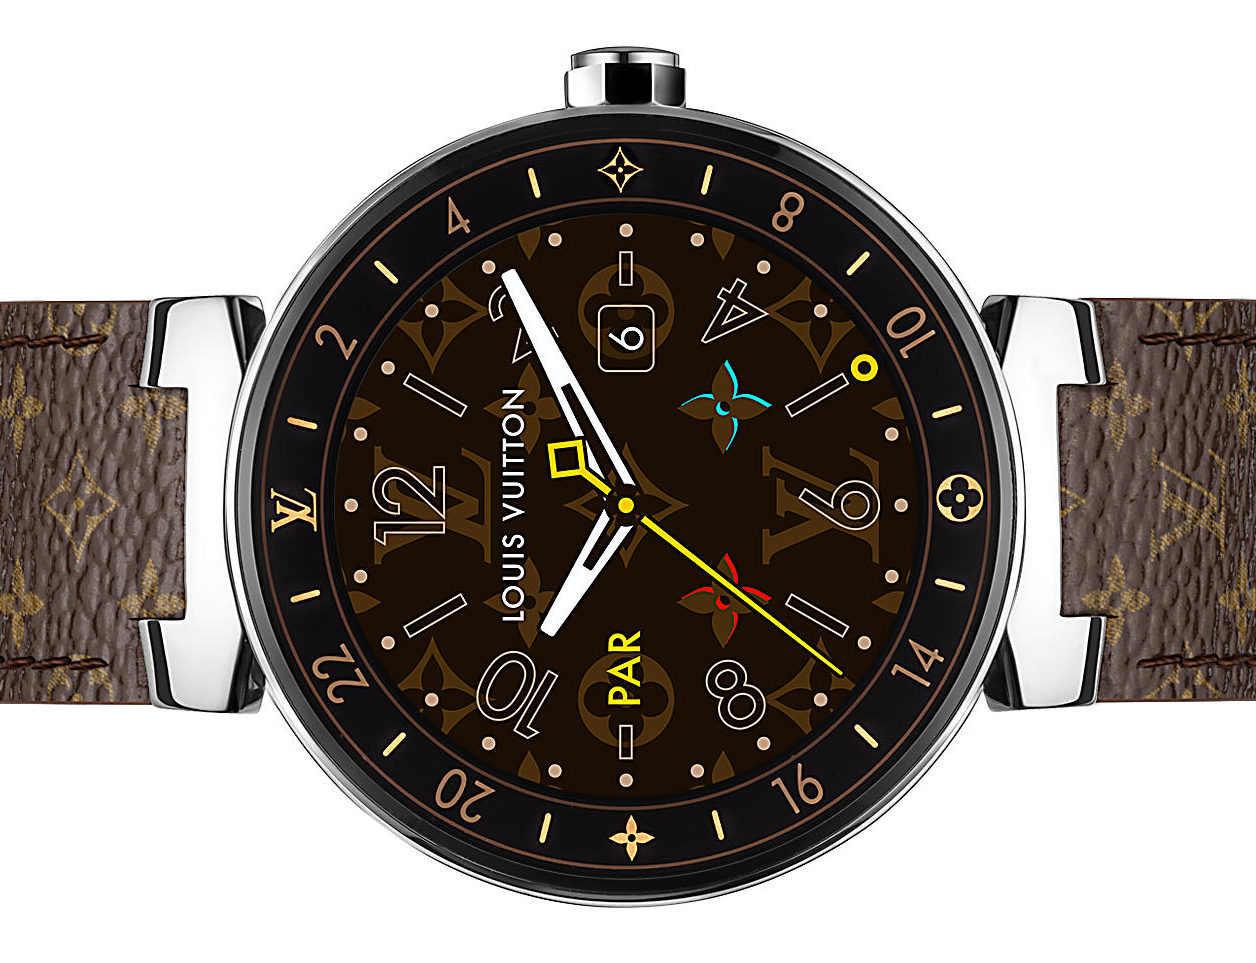 Thundercomm powers Louis Vuitton's new connected watch - Thundercomm